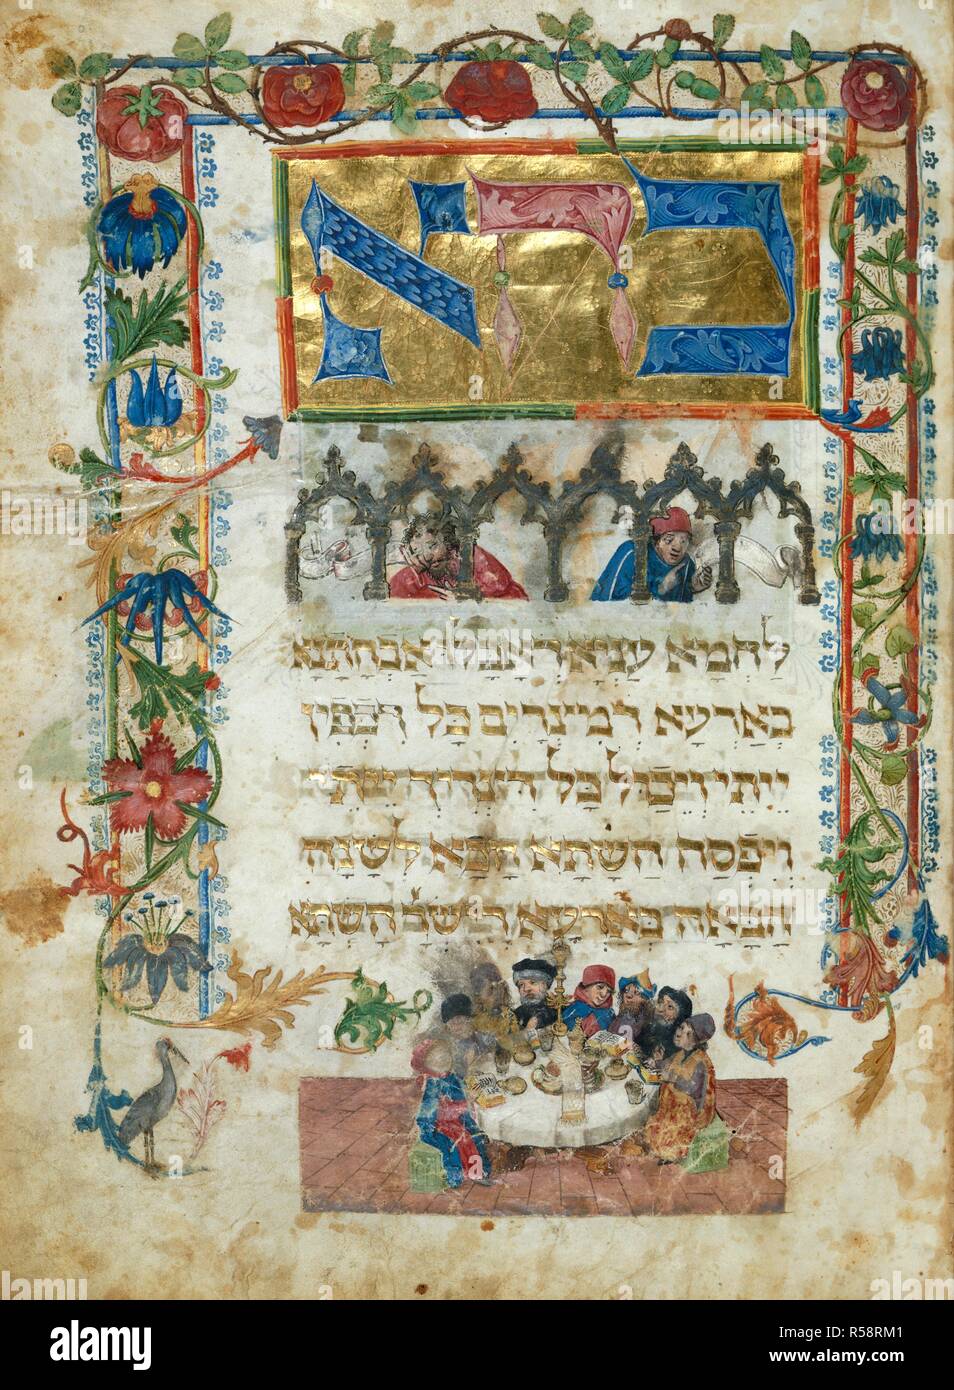 The Seder. The Ashkenazi Haggadah (Feibusch Haggadah). South Germany, c.1460-1475. The Seder ( Passover meal ) in progress. Vellum manuscript.  Image taken from The Ashkenazi Haggadah (Feibusch Haggadah).  Originally published/produced in South Germany, c.1460-1475. . Source: Add. 14762, f.6. Language: Hebrew. Author: Feibusch, Joel ben Simeon. Stock Photo